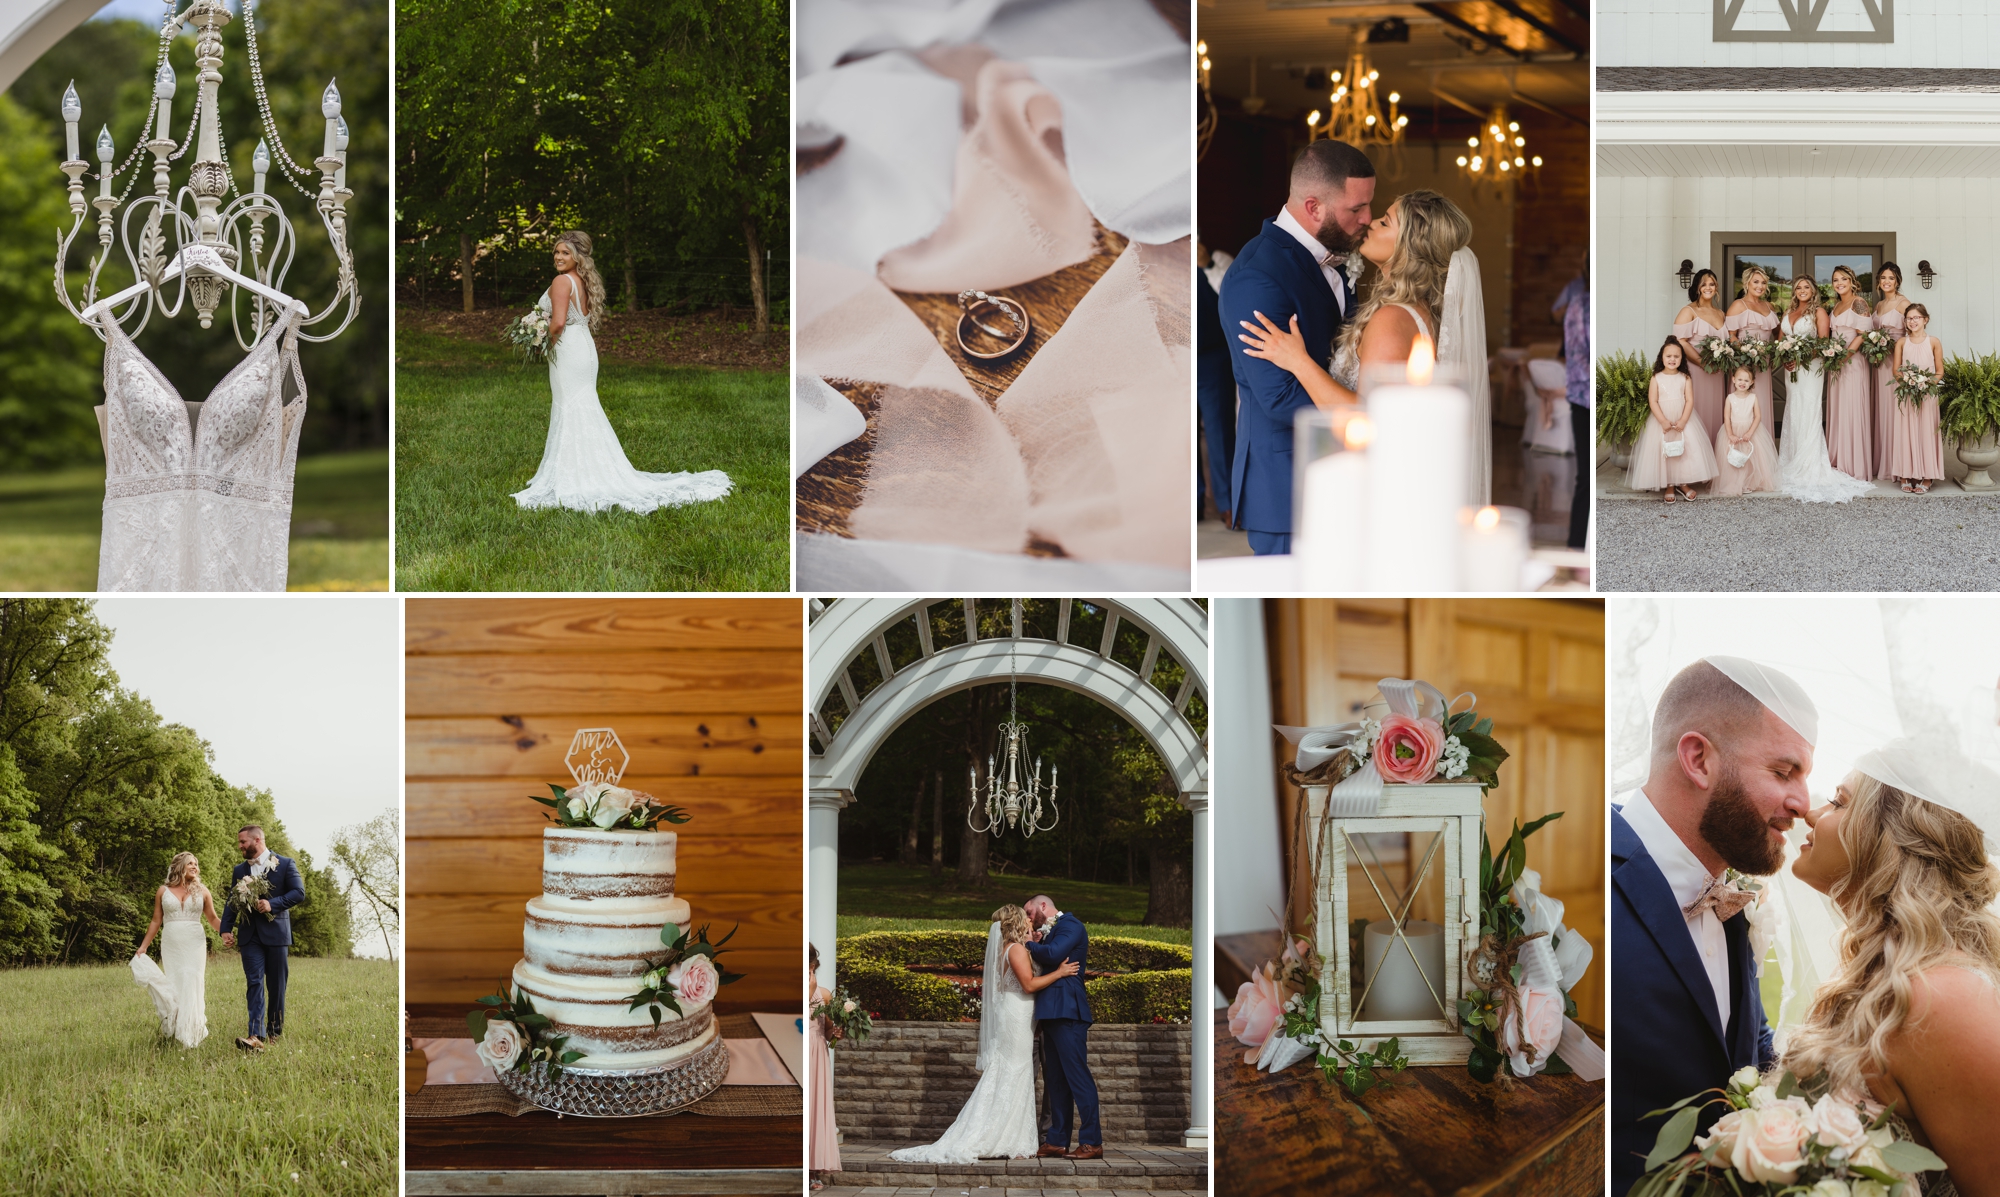 Wedding photos at The Carriage House of Dumplin Valley in Morristown, TN